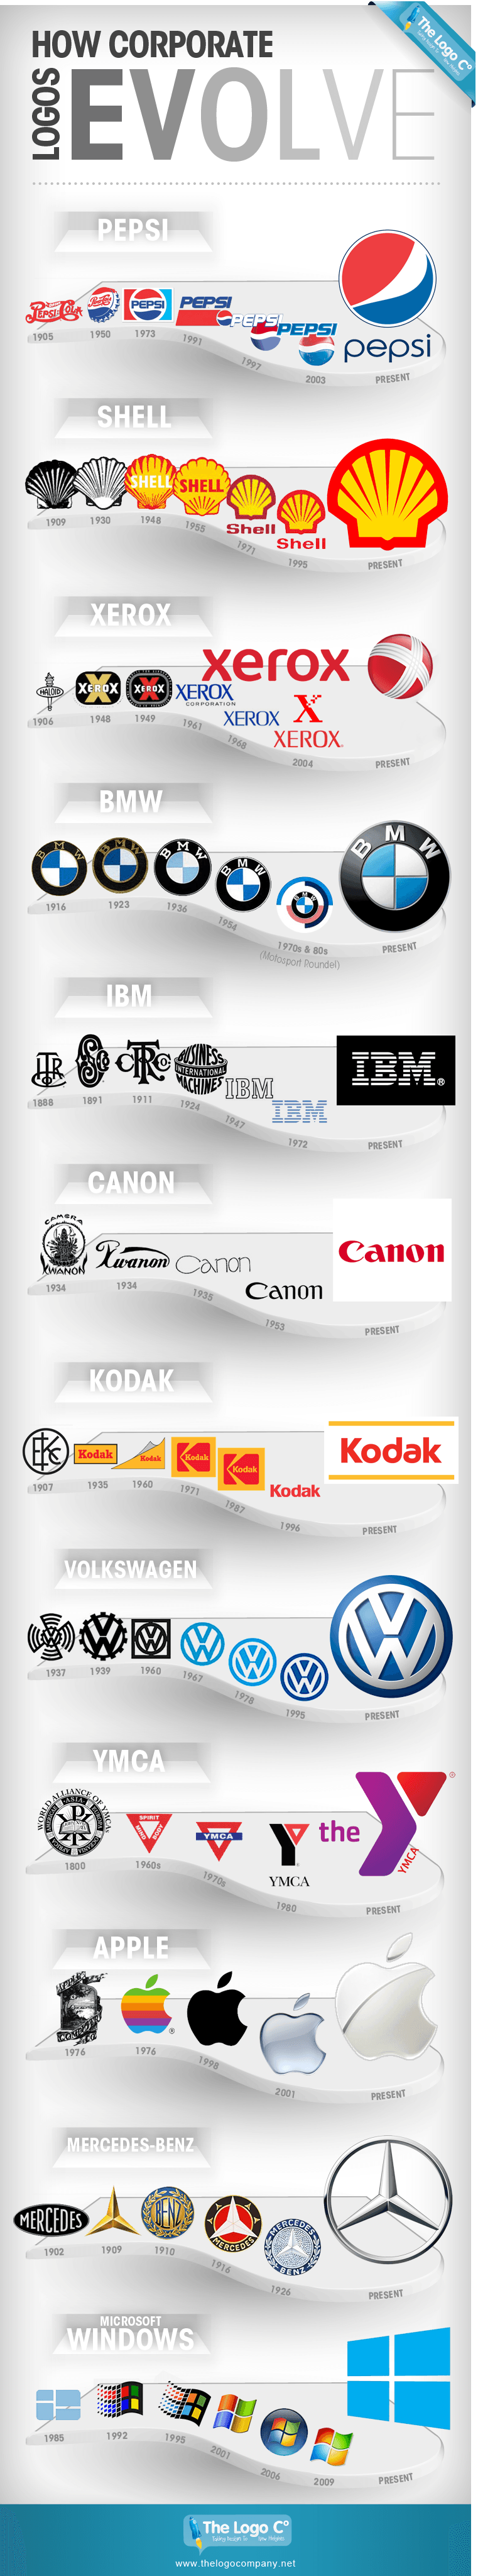 Infographic: How the World's Most Iconic Logos Evolve Over Time